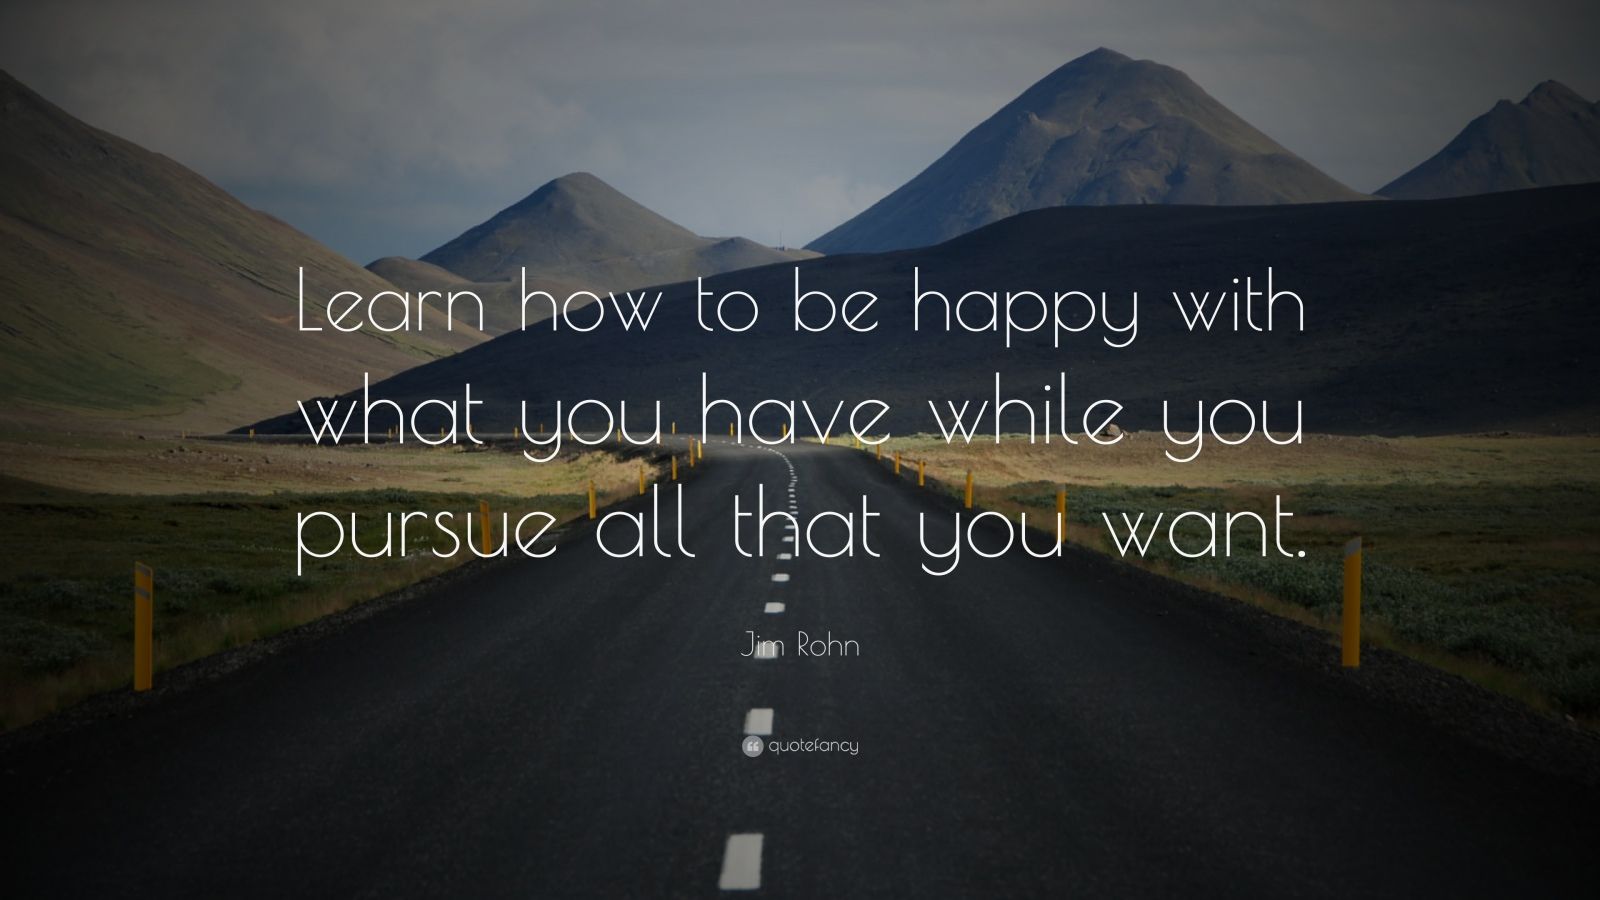 Jim Rohn Quote: “Learn how to be happy with what you have while you